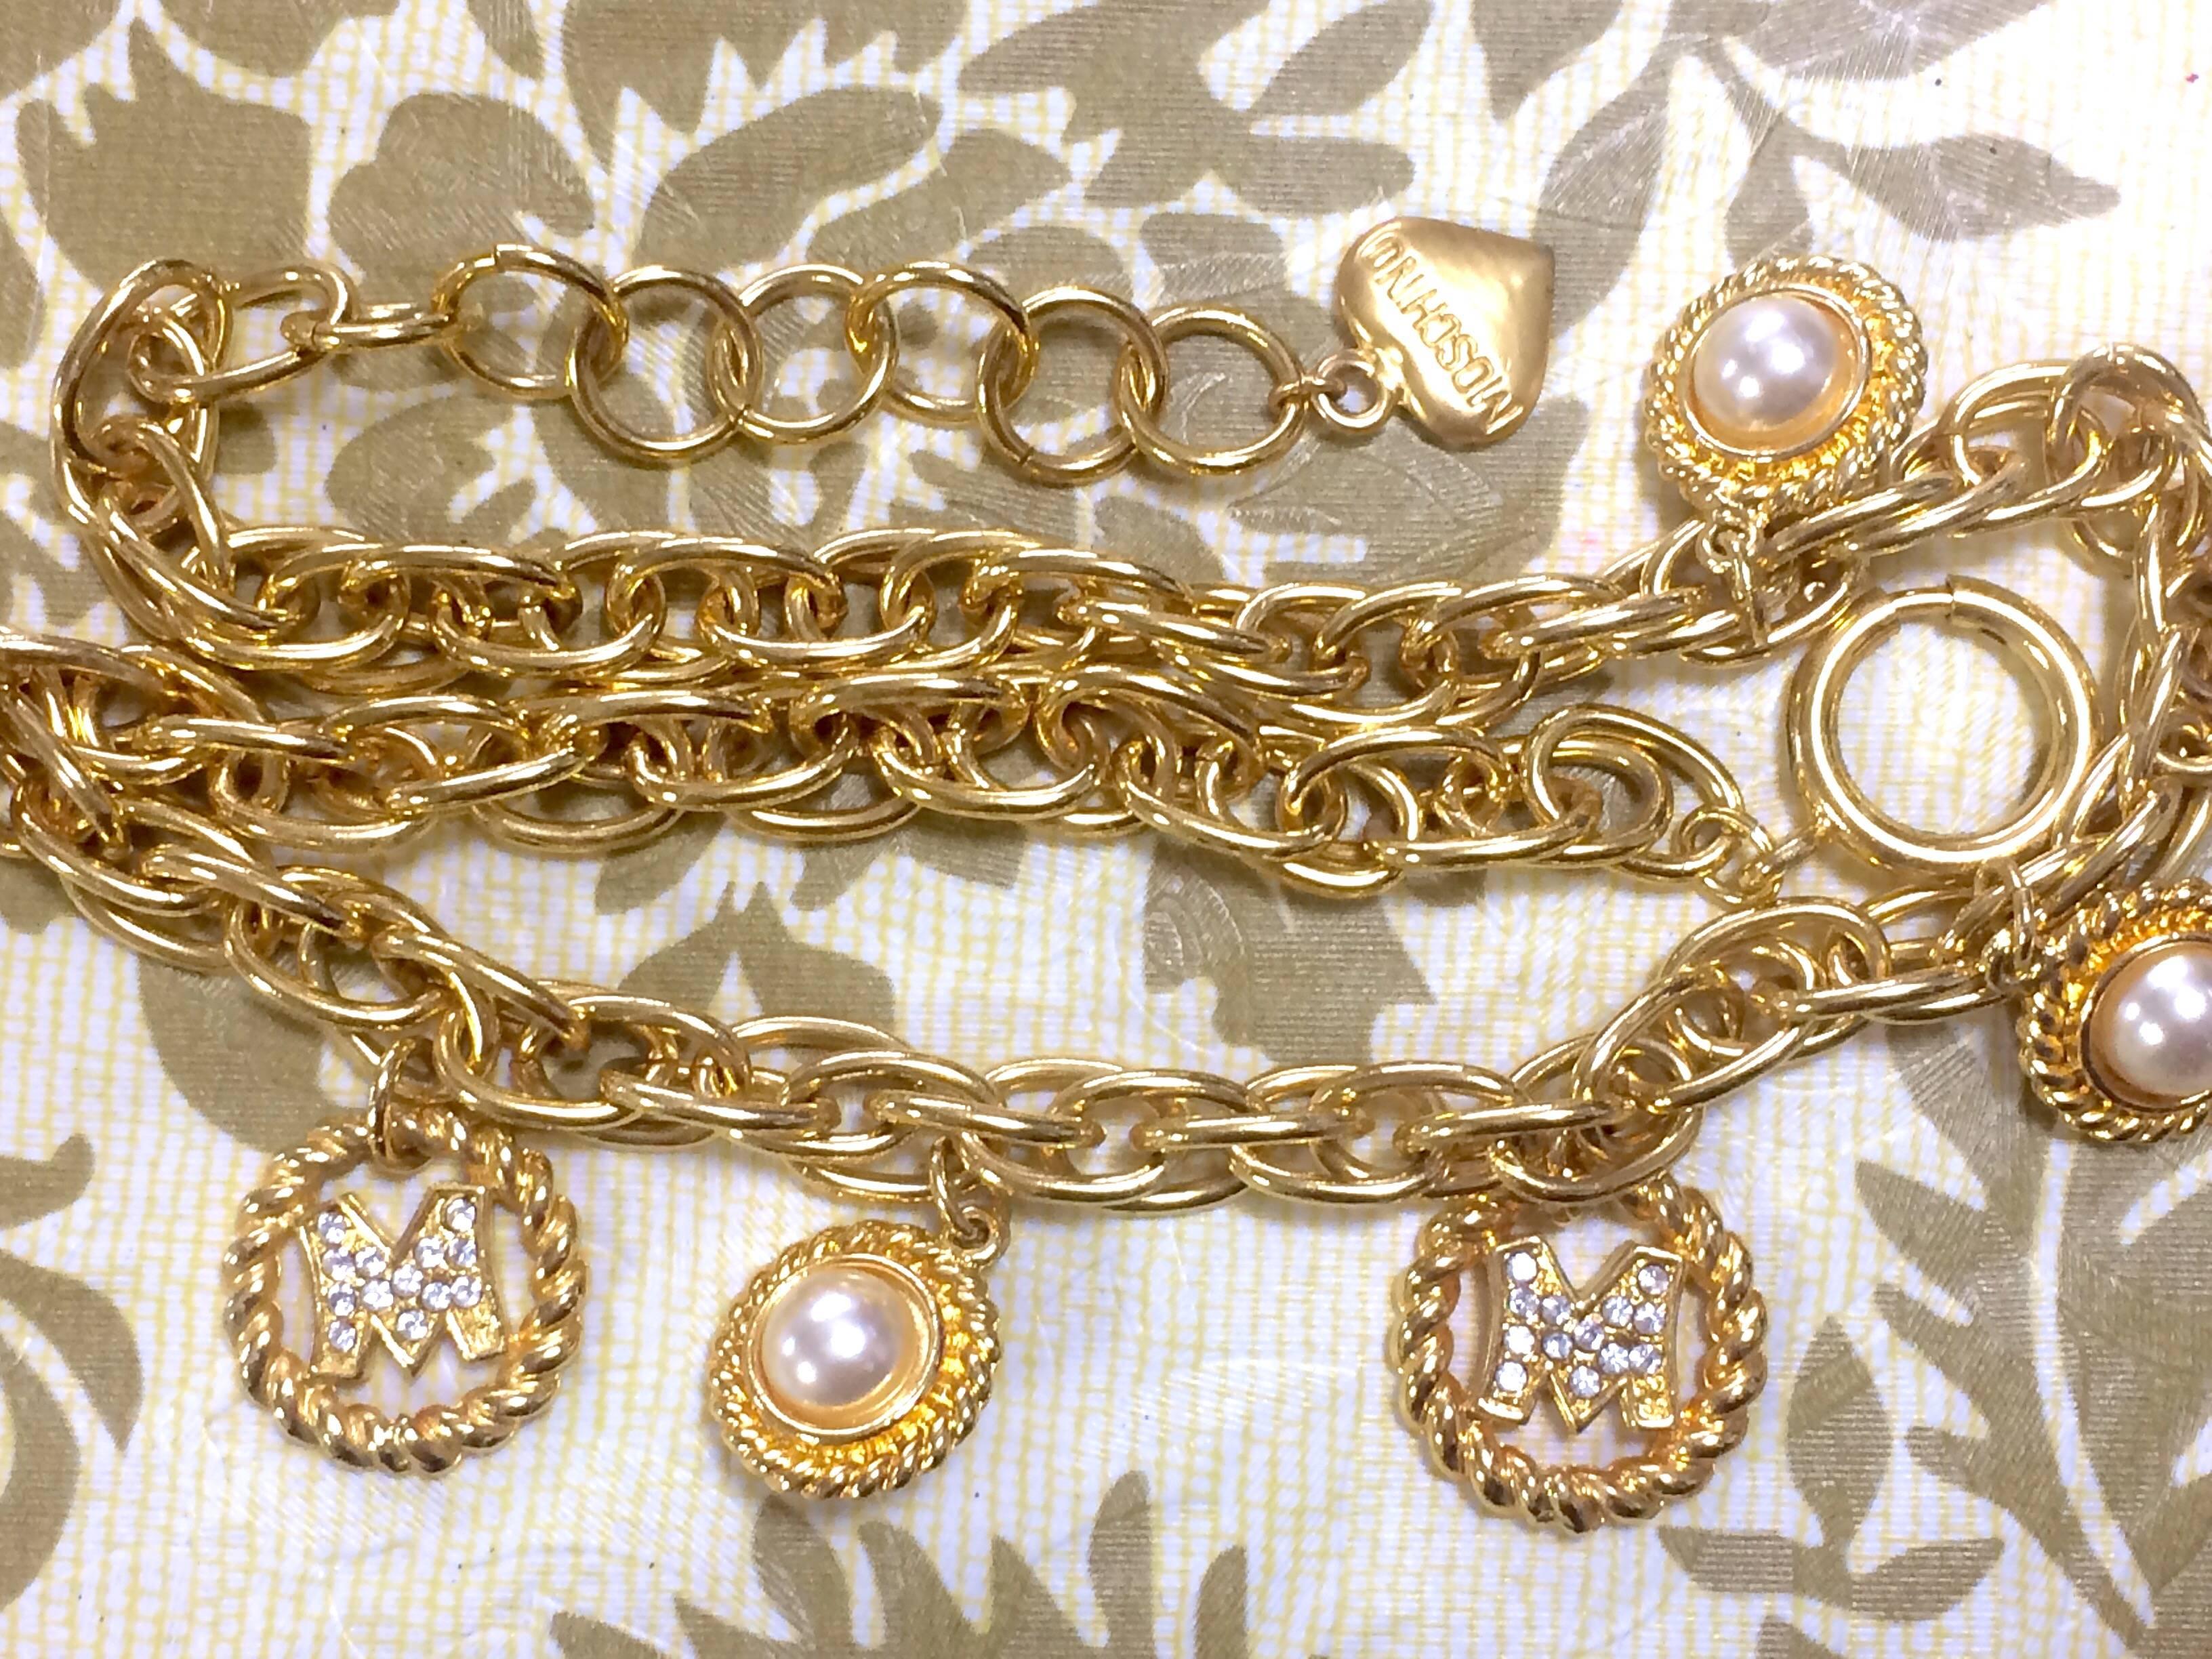 Vintage Moschino statement necklace with golden dangling charms with faux pearls In Excellent Condition For Sale In Kashiwa, Chiba